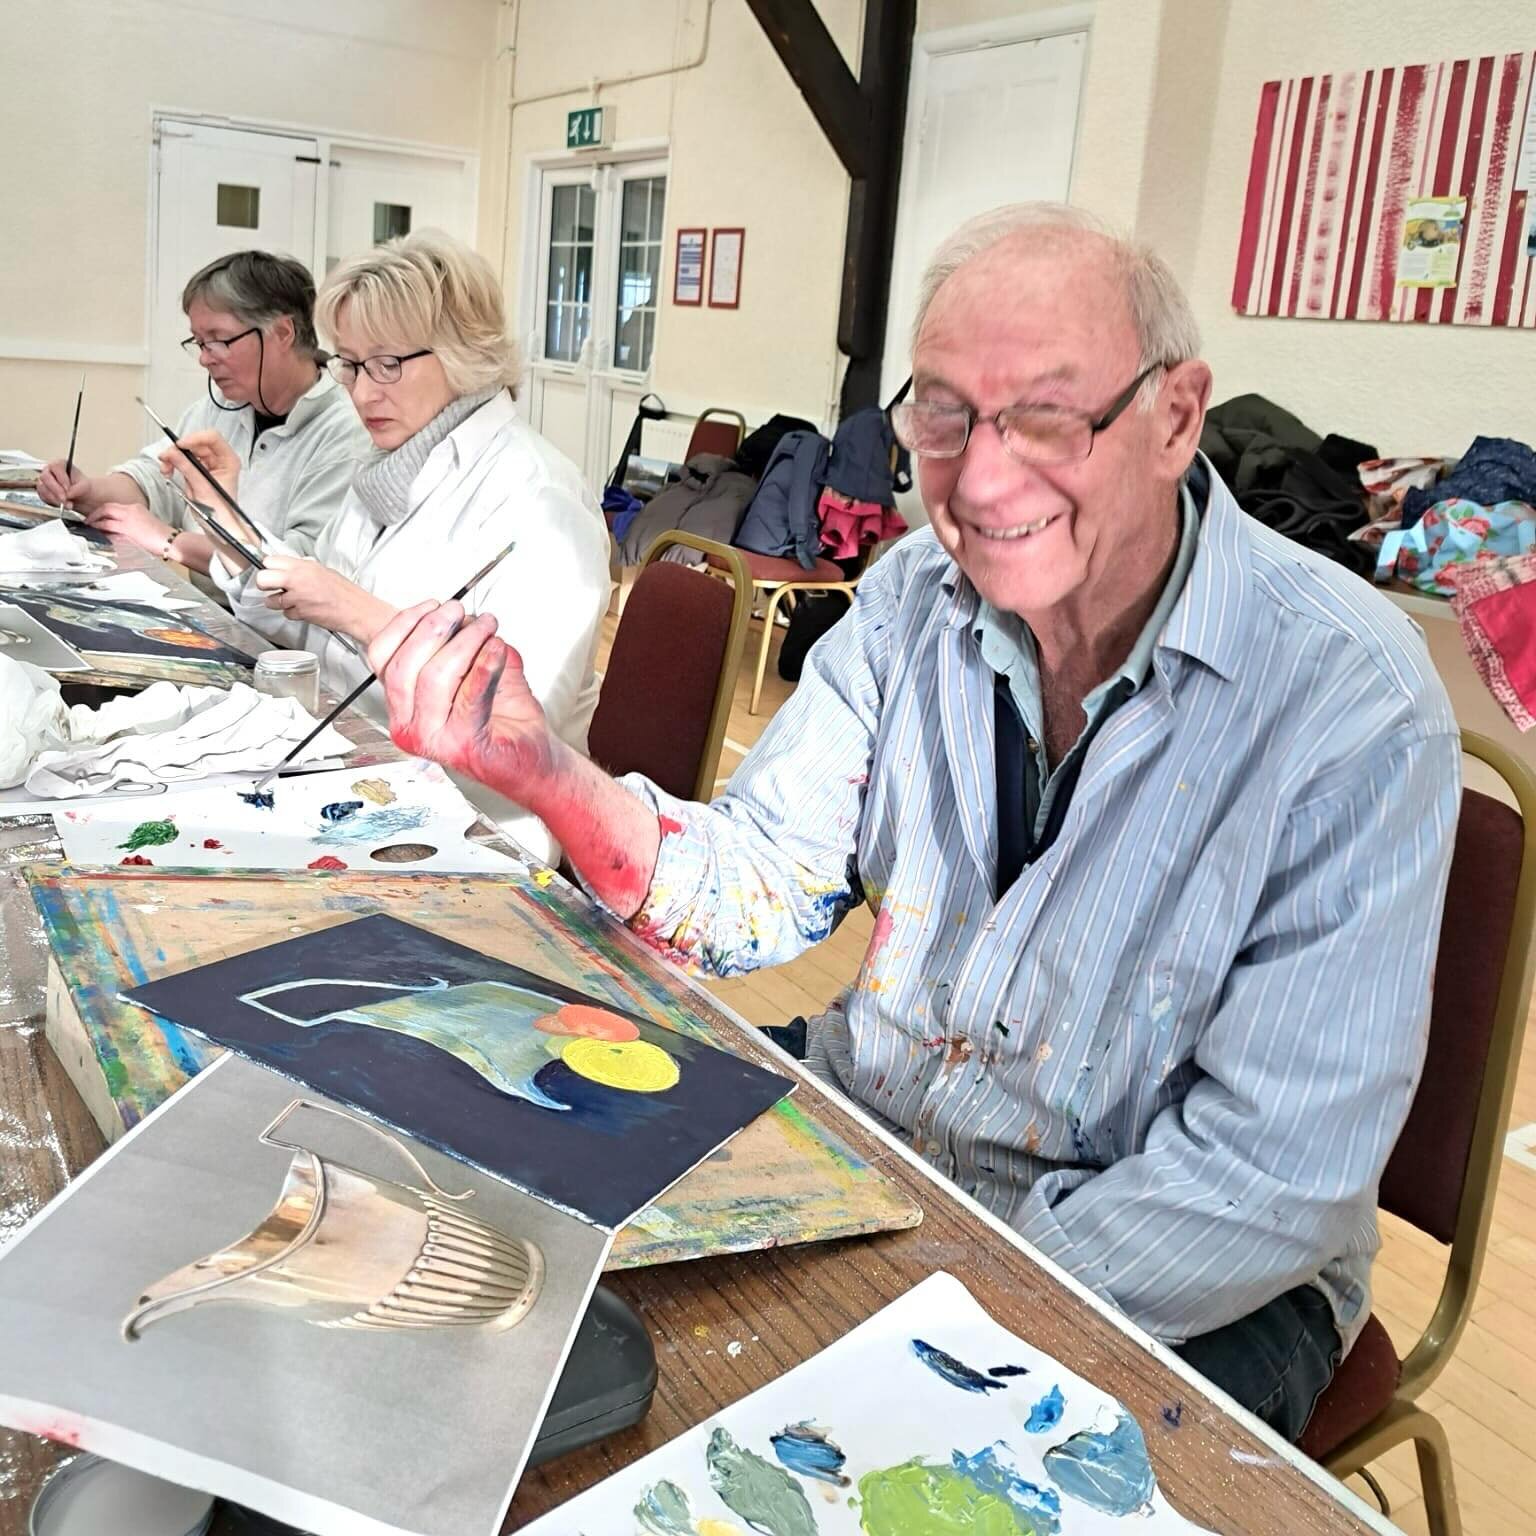 We had the most fantastic fun in our oil painting workshop today, everybody was new to oils and we had some who had never painted before, but they all created beautiful work and (mostly) got the hang of working tidily! We all just loved it! Sign up o